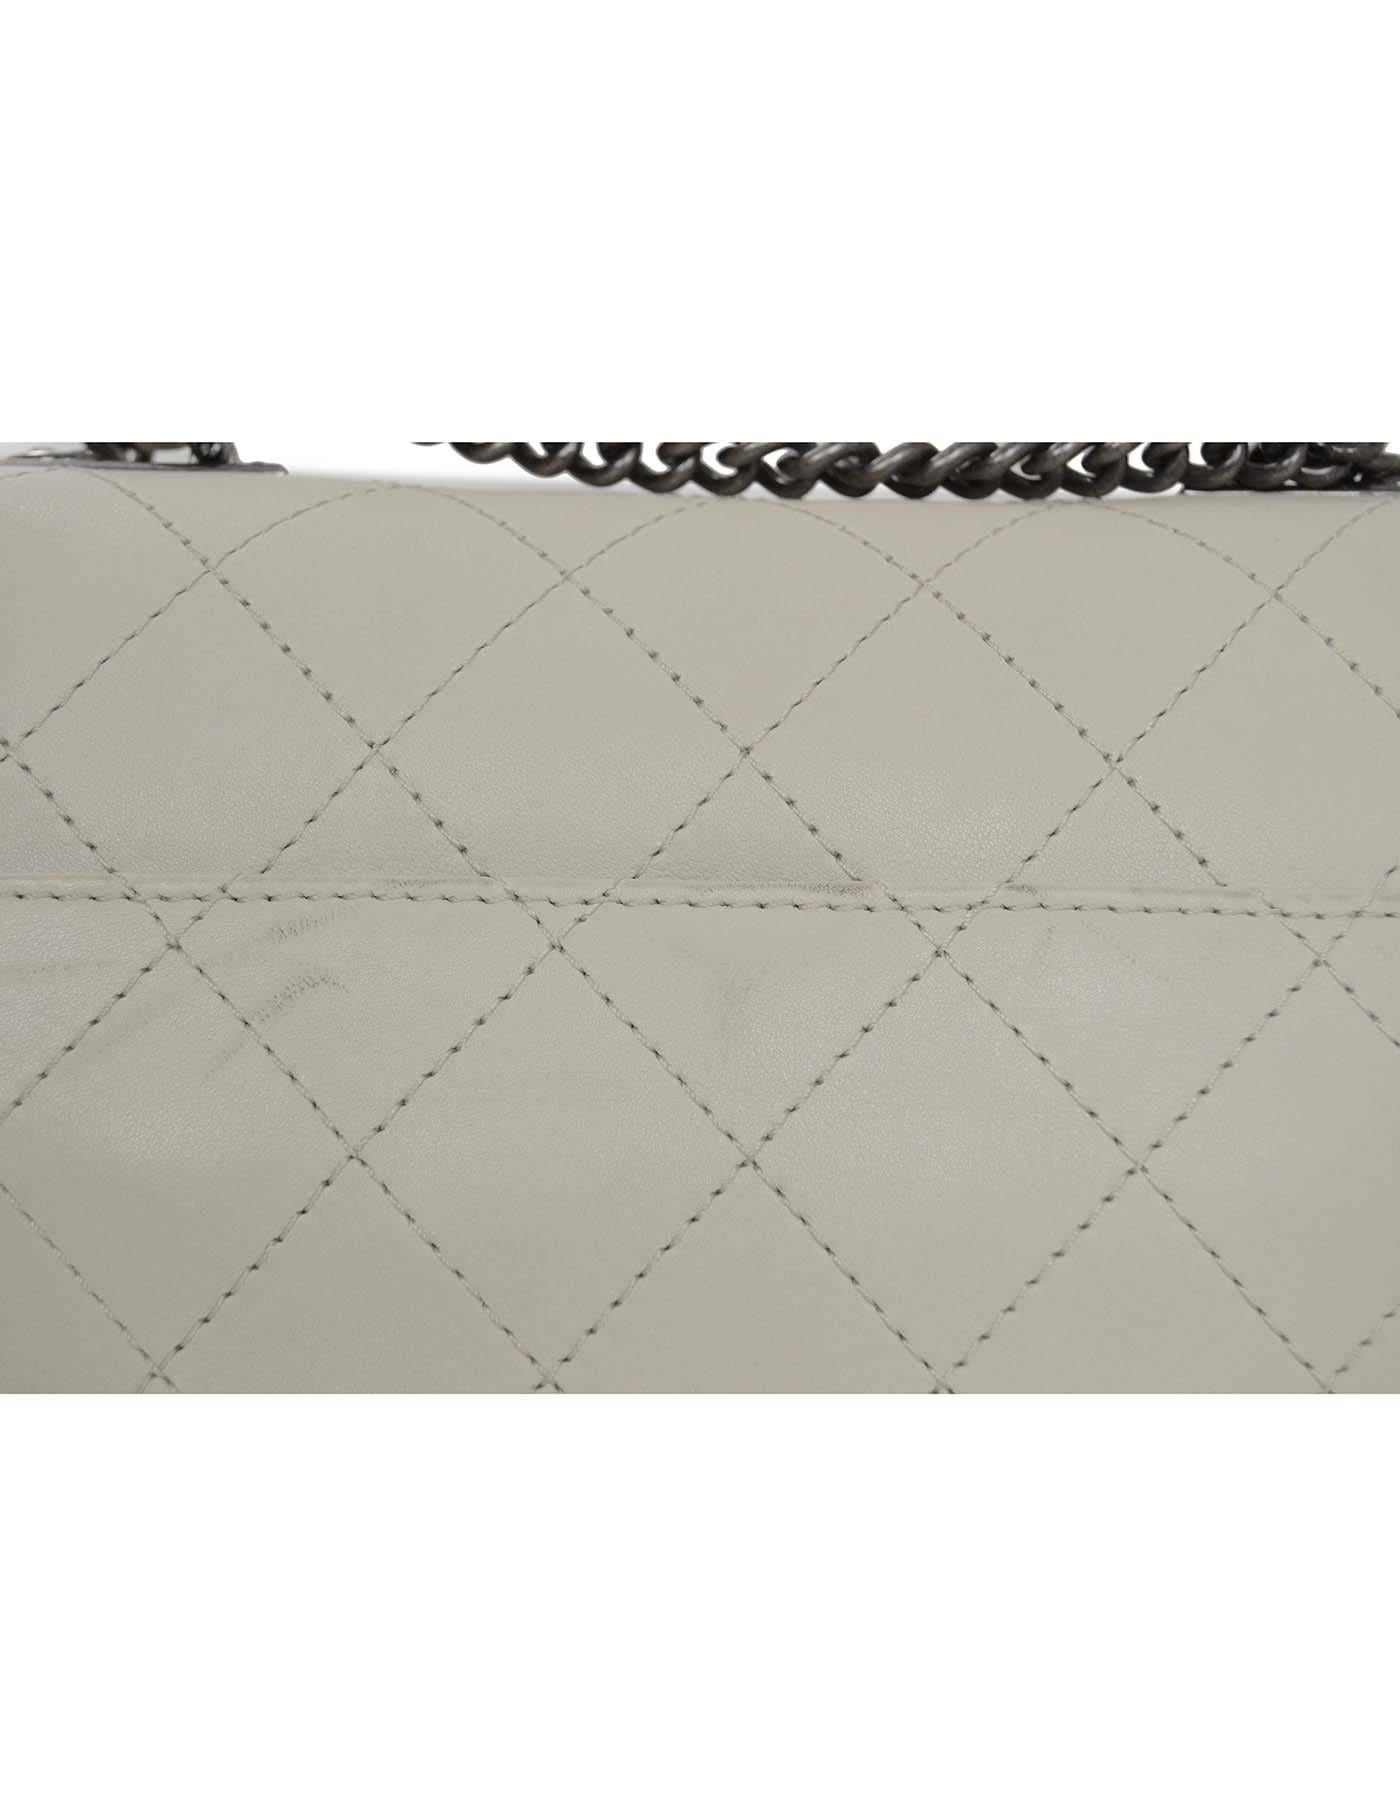 Chanel 2016 Ivory Quilted Urban Luxury Flap Bag SHW RT. $4, 800 1